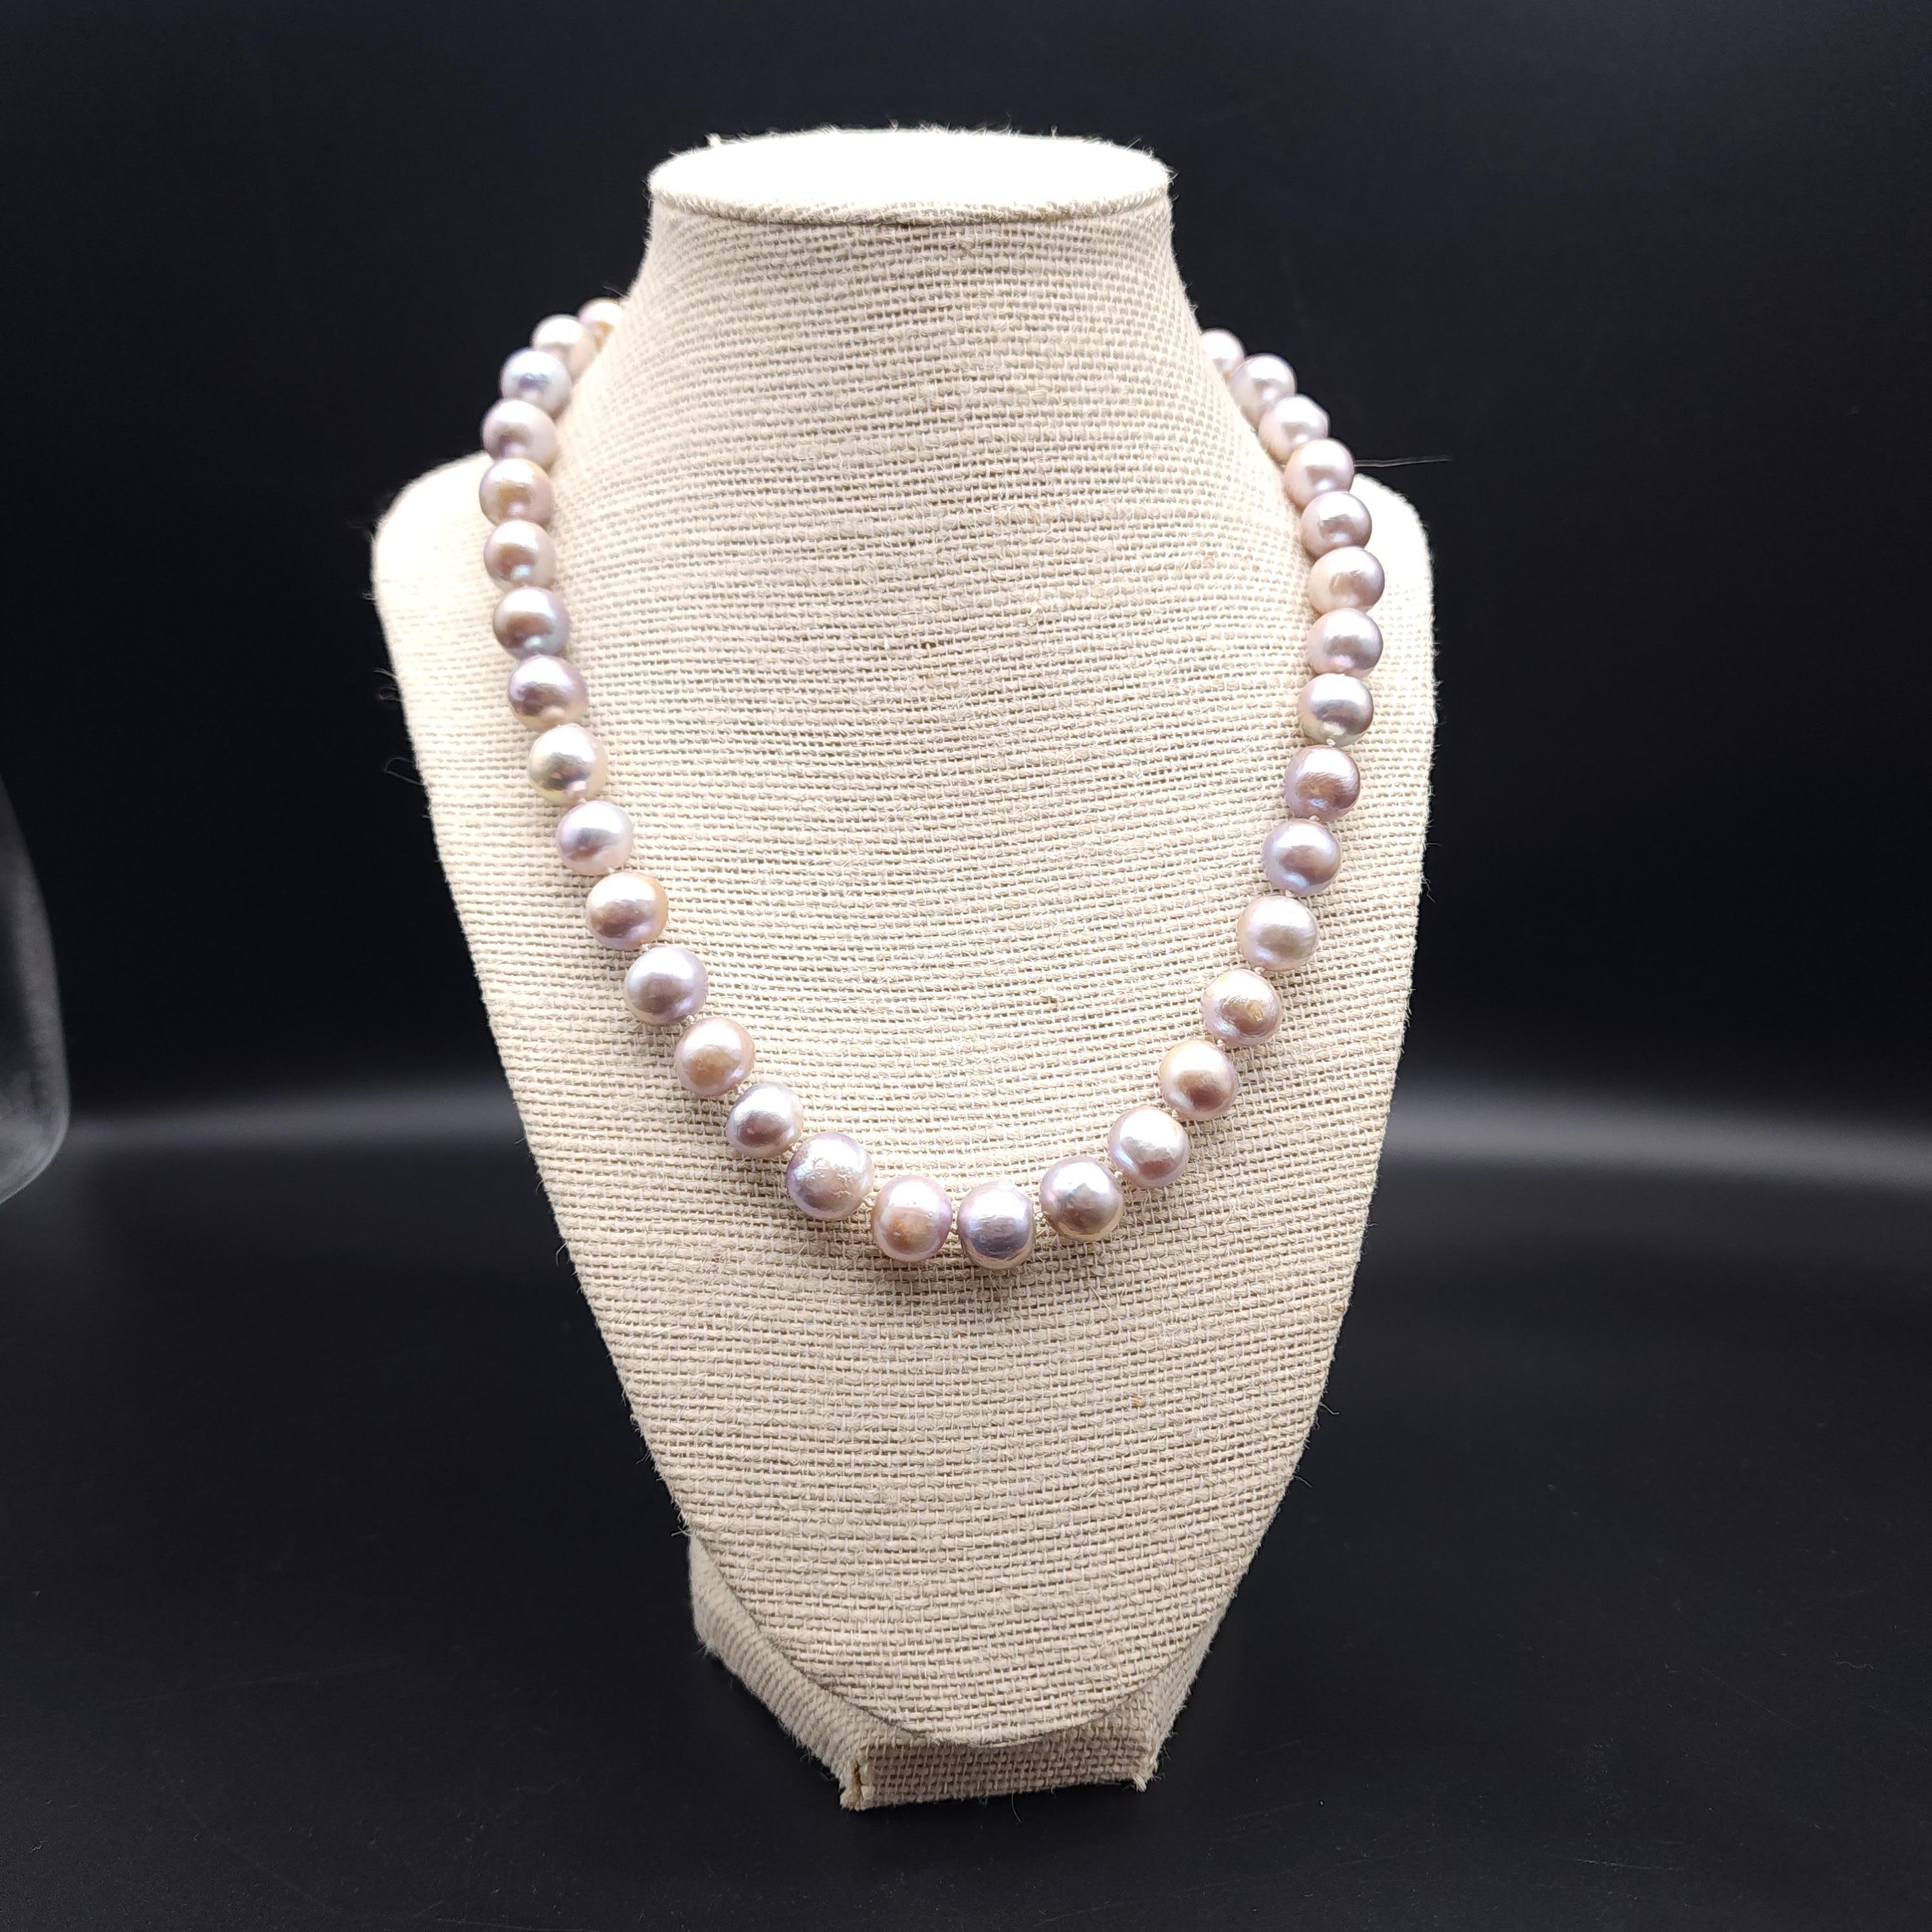 Necklace length: 47cm / 18.5 inches
Cultured pearl, approx 1cm each
Color: Assortment of lavender shades
Marks / Hallmarks: 925 on clasp

Indulge in timeless elegance with our vintage cultured pearl bead necklace. Each lustrous pearl exudes